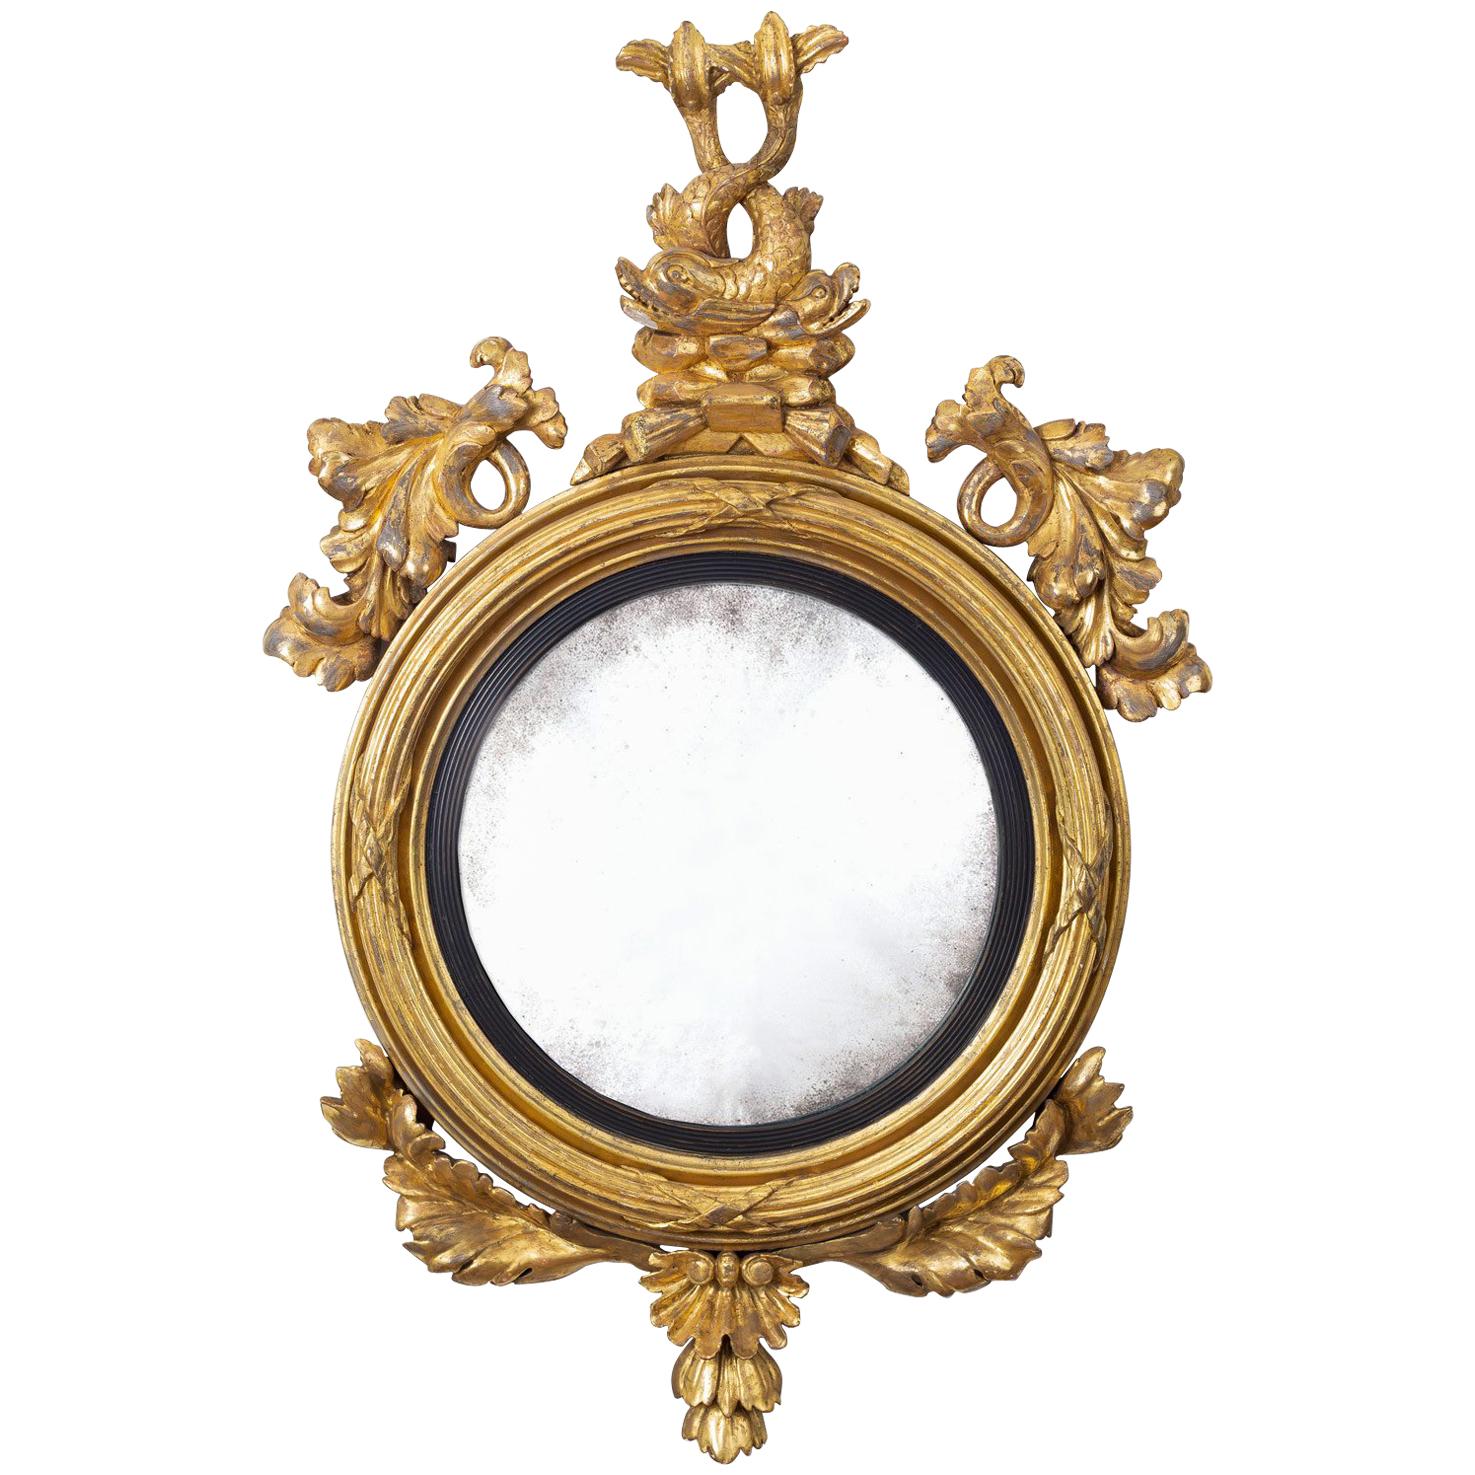 Regency Giltwood Convex Mirror with Dolphins, circa 1810 For Sale